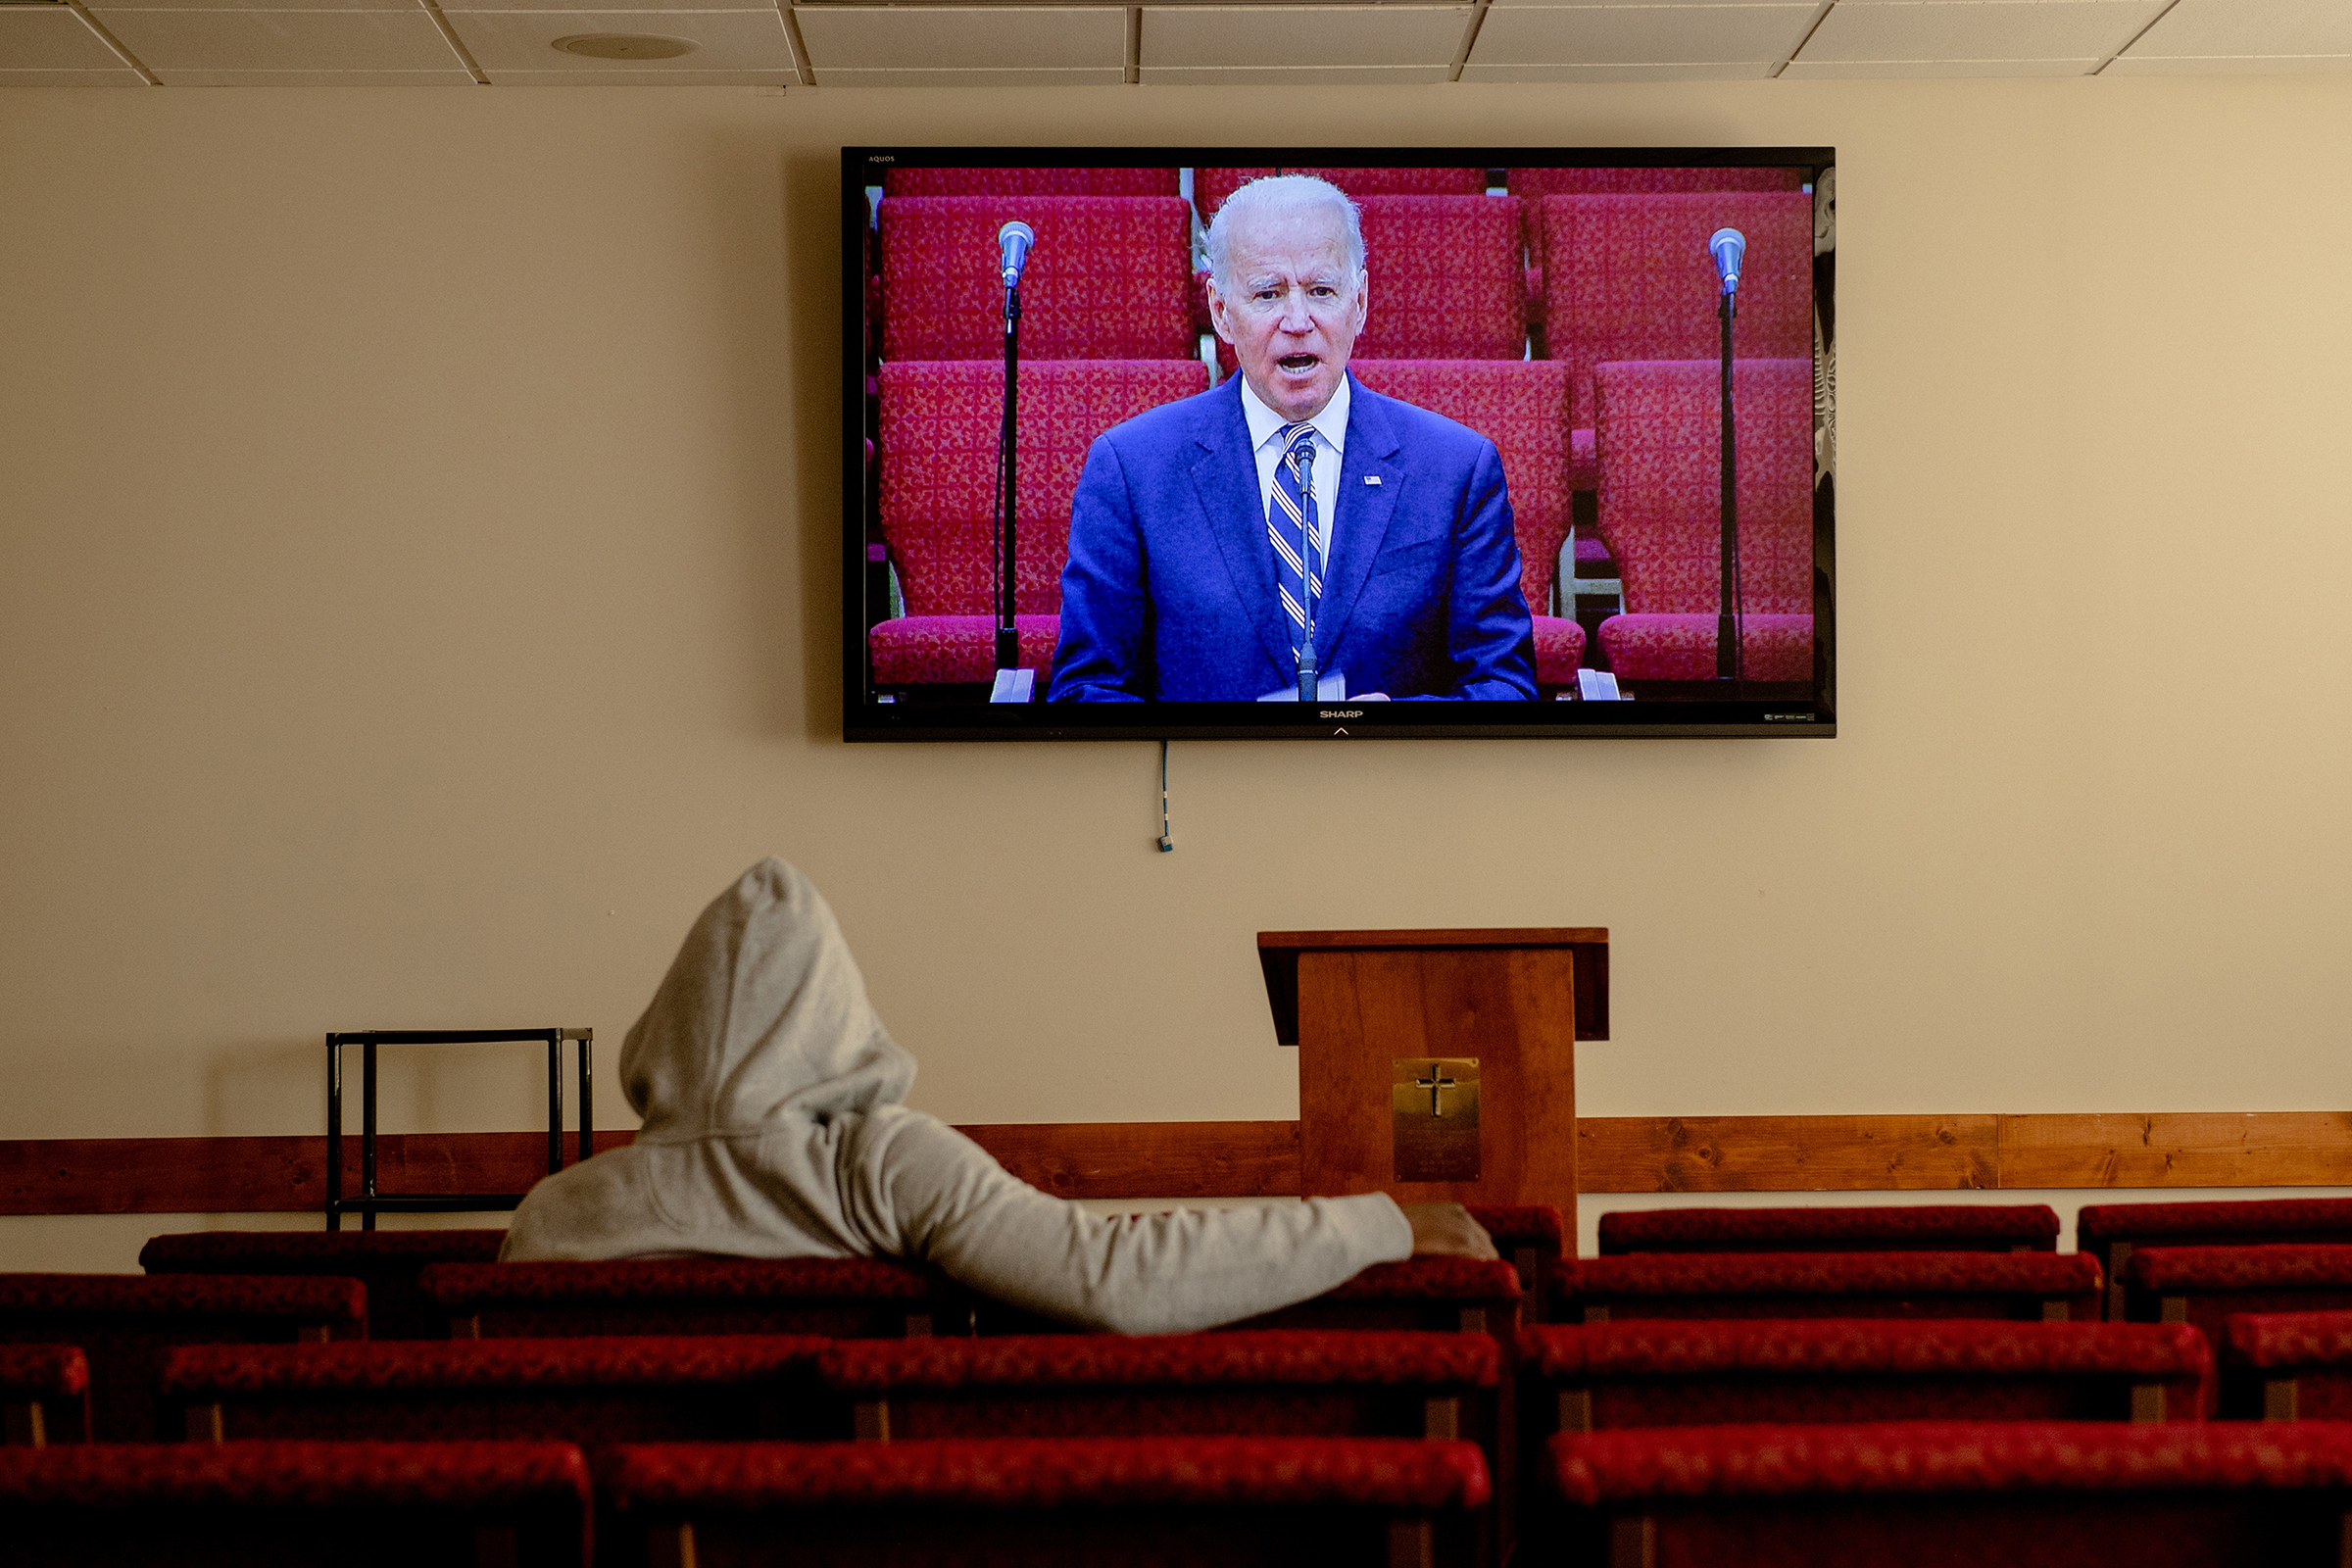 A screen shows Democratic presidential candidate Joe Biden during a service at Royal Missionary Baptist Church in North Charleston, S.C., on Feb. 23, 2020. (Hilary Swift—The New York Times/Redux)